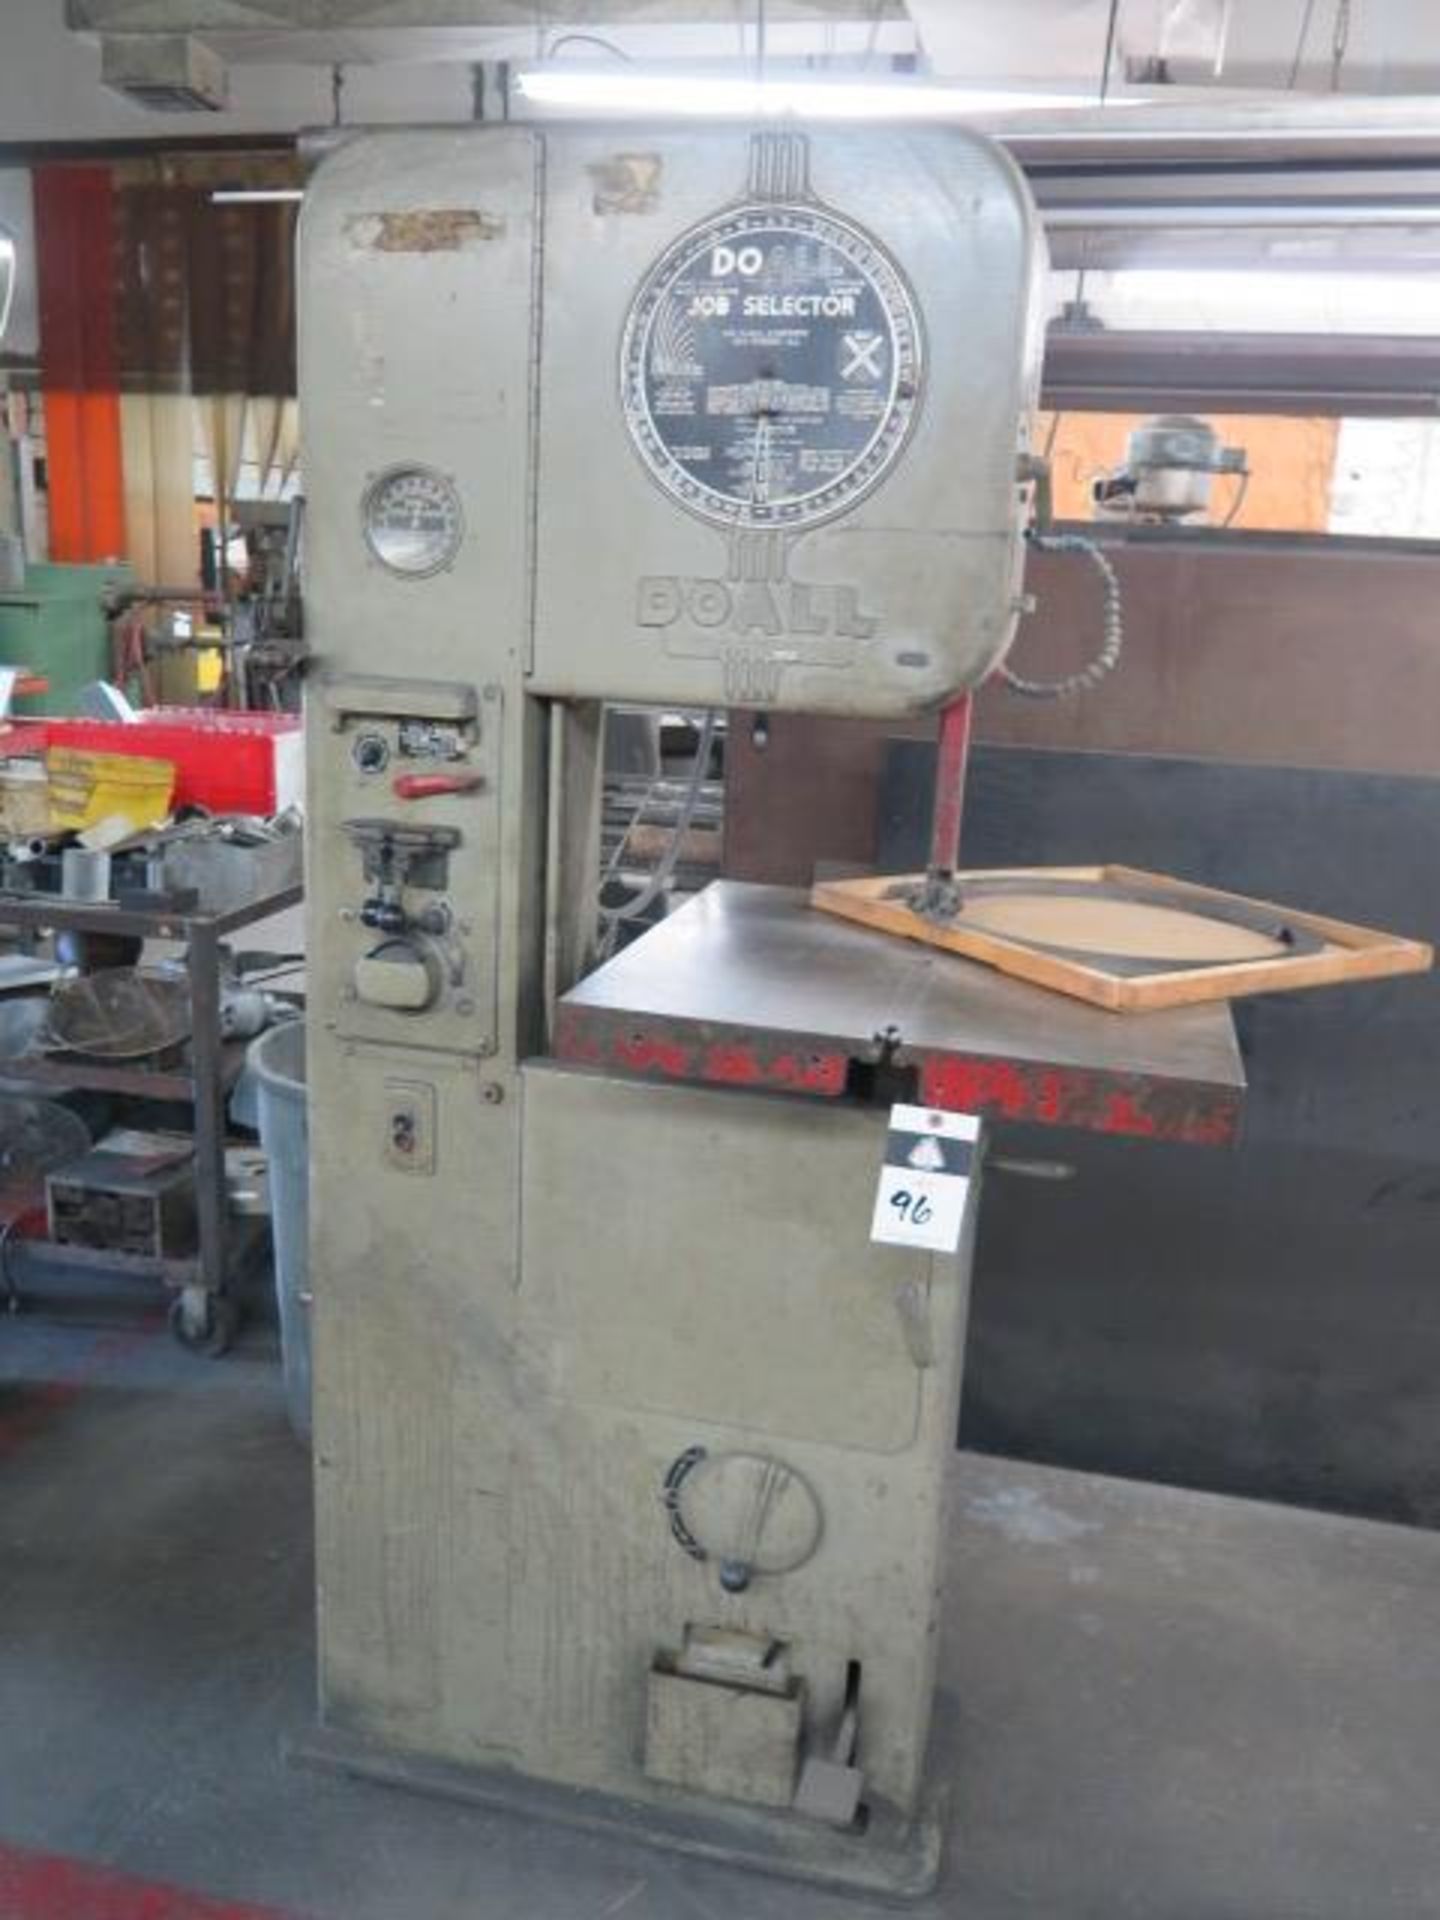 DoAll ML 16” Vertical Band Saw s/n 5216689 w/ Blade Welder, 0-1600 FPM, 24” x 24” Table SOLD AS IS